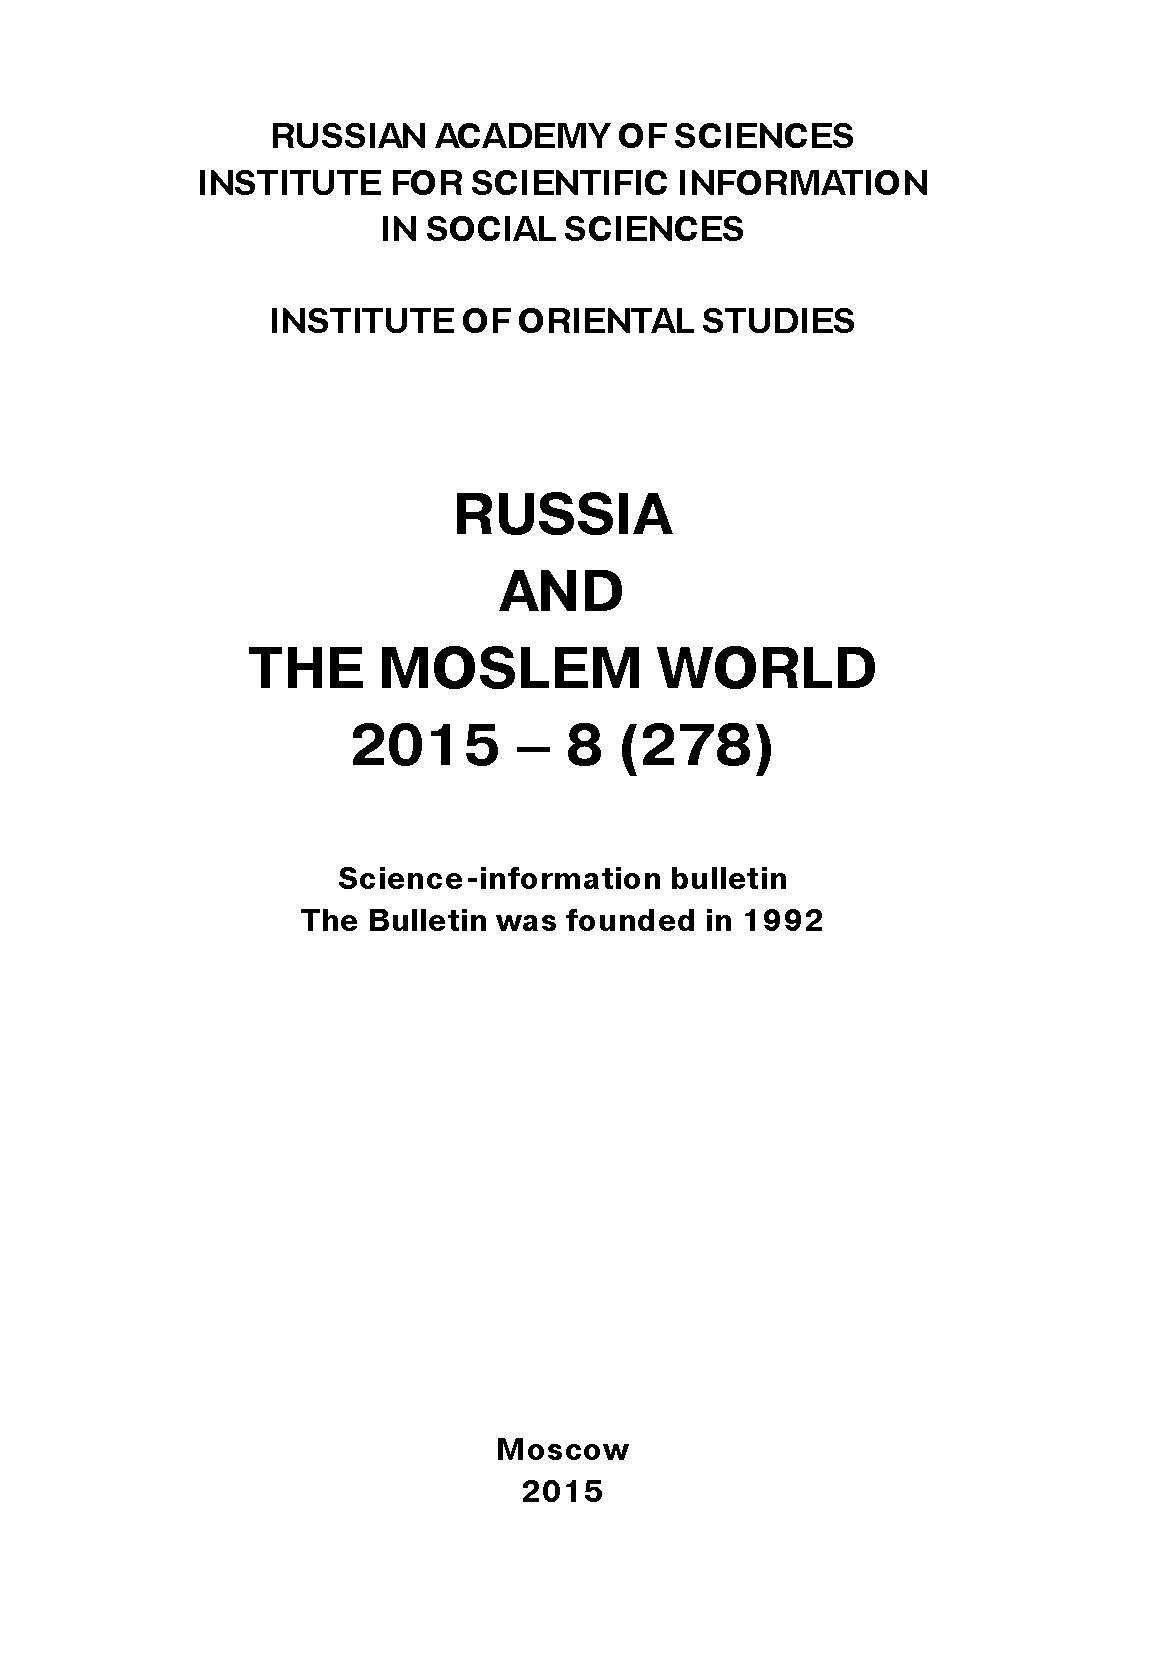 Russia and the Moslem World№ 08 / 2015